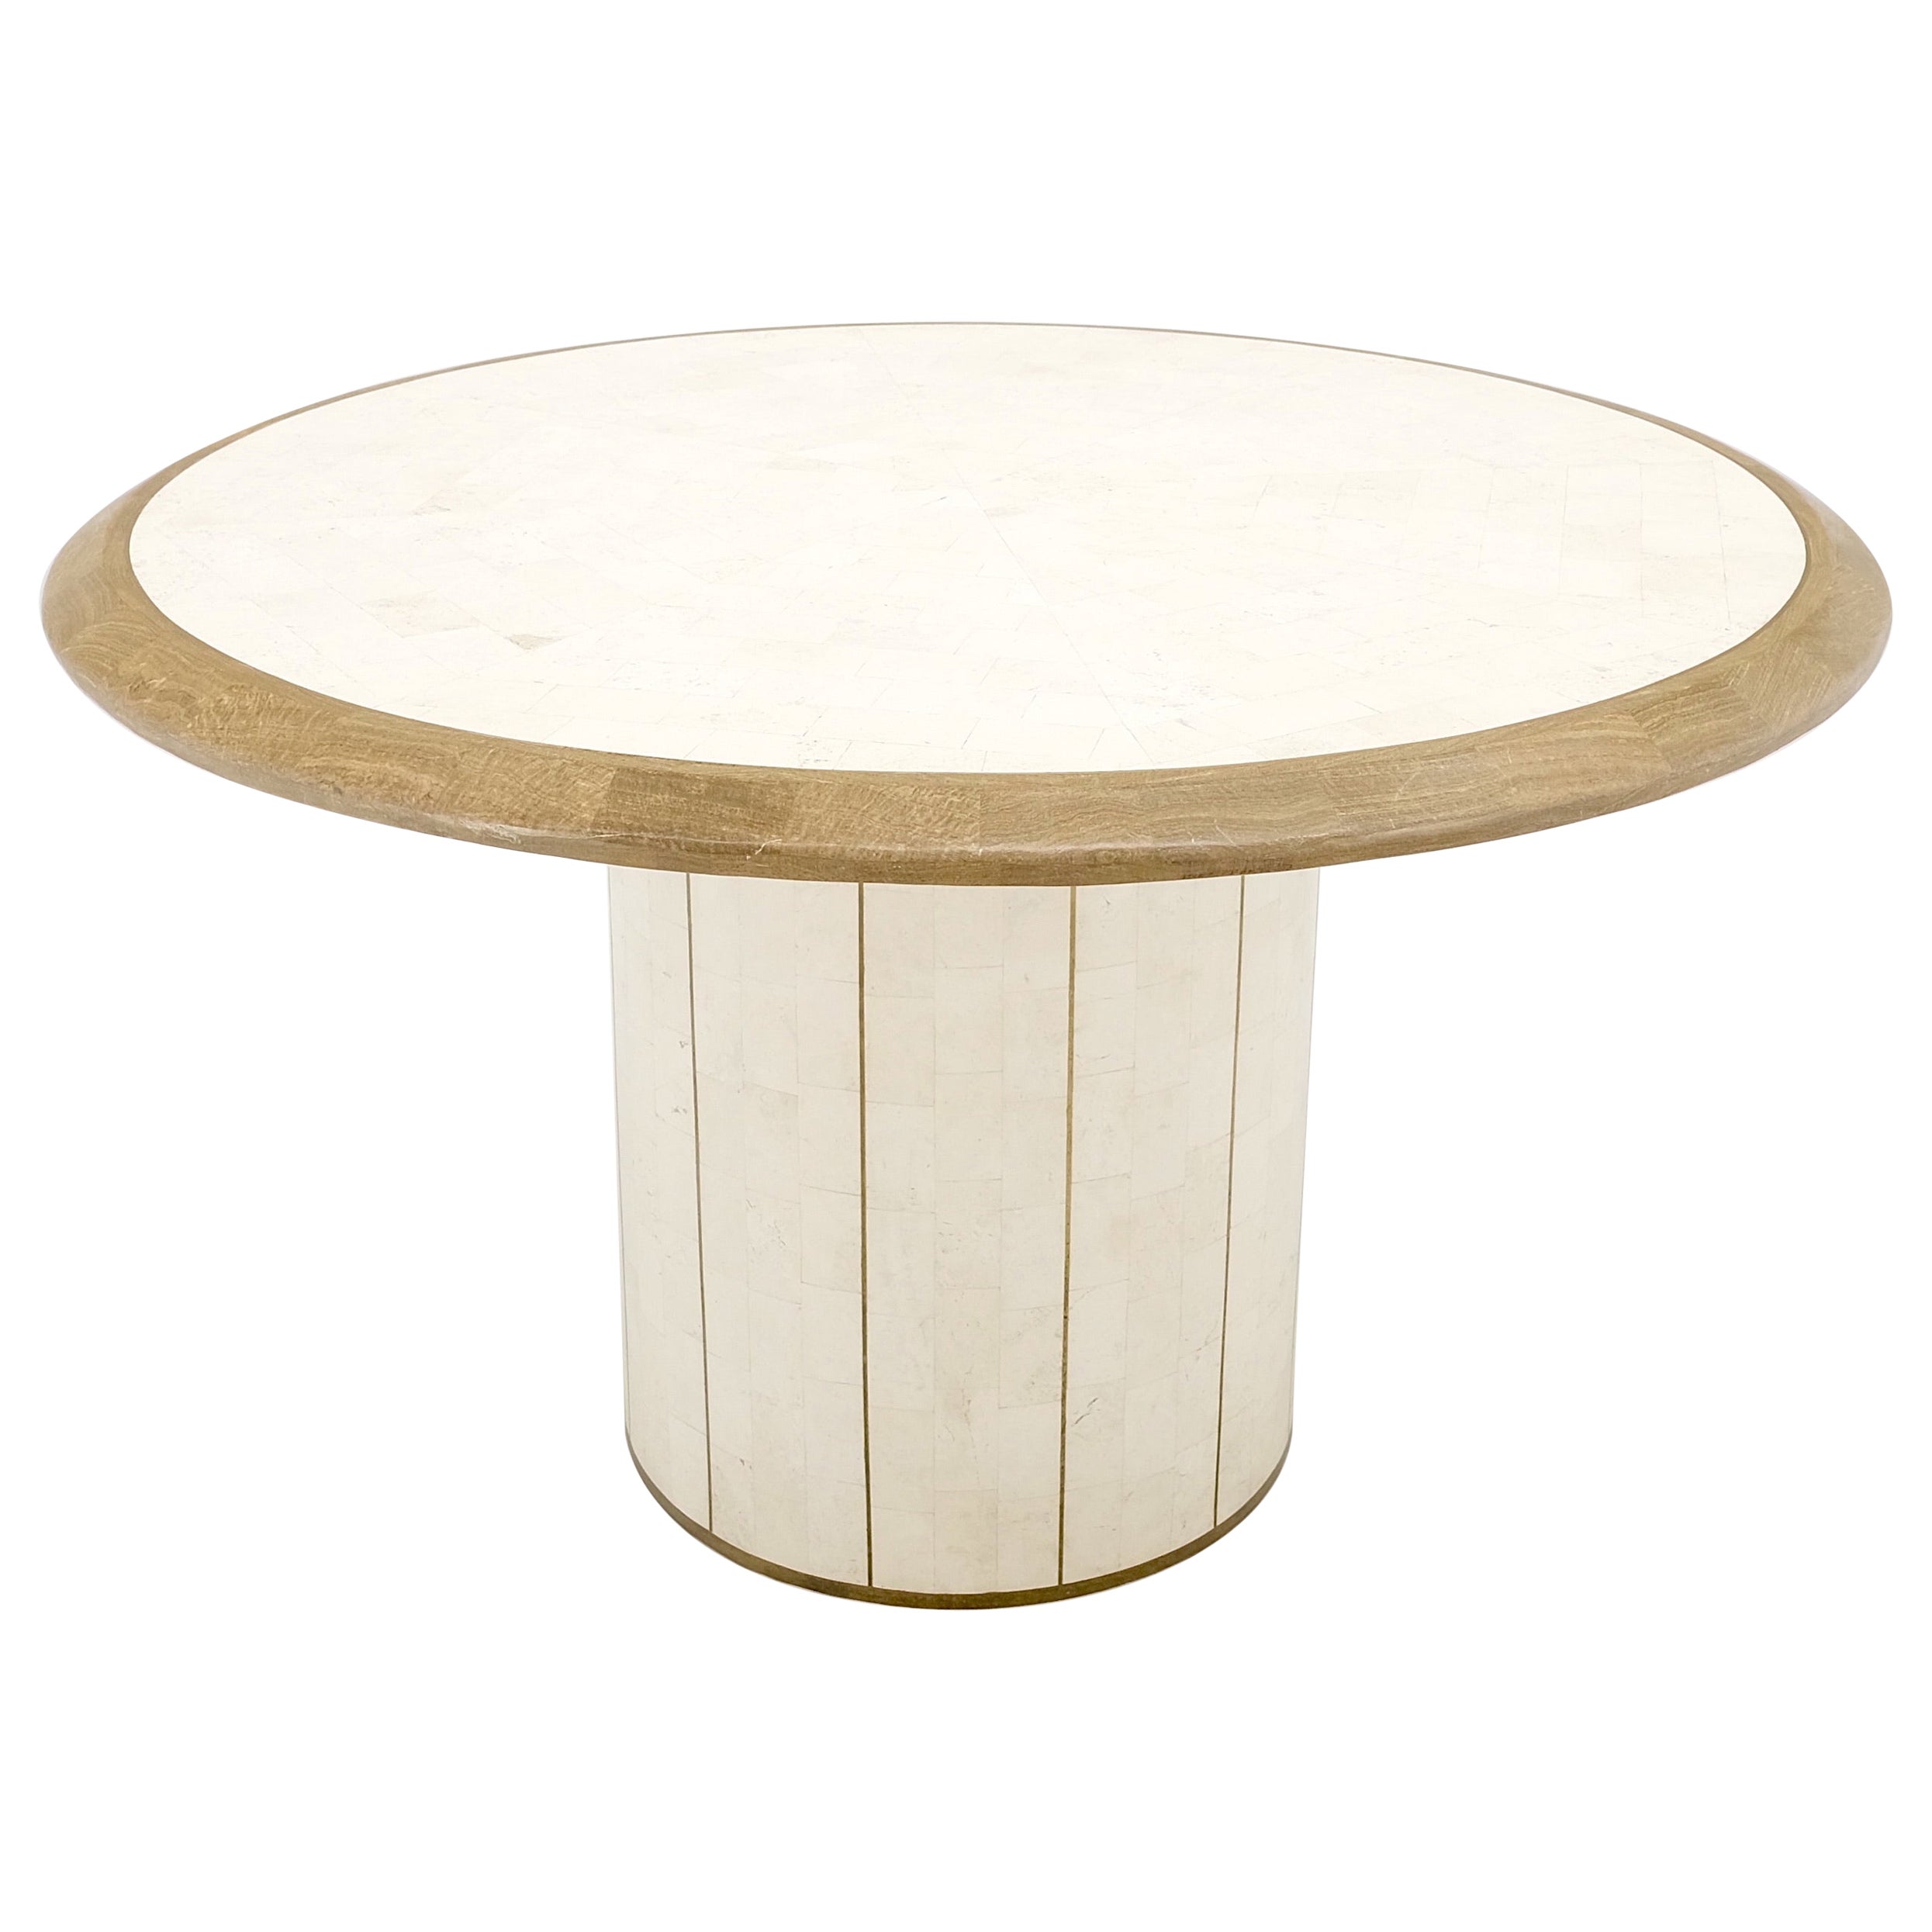 Round Travertine Tile Brass Inlay Cylinder Base Dining Conference Table Mint! For Sale